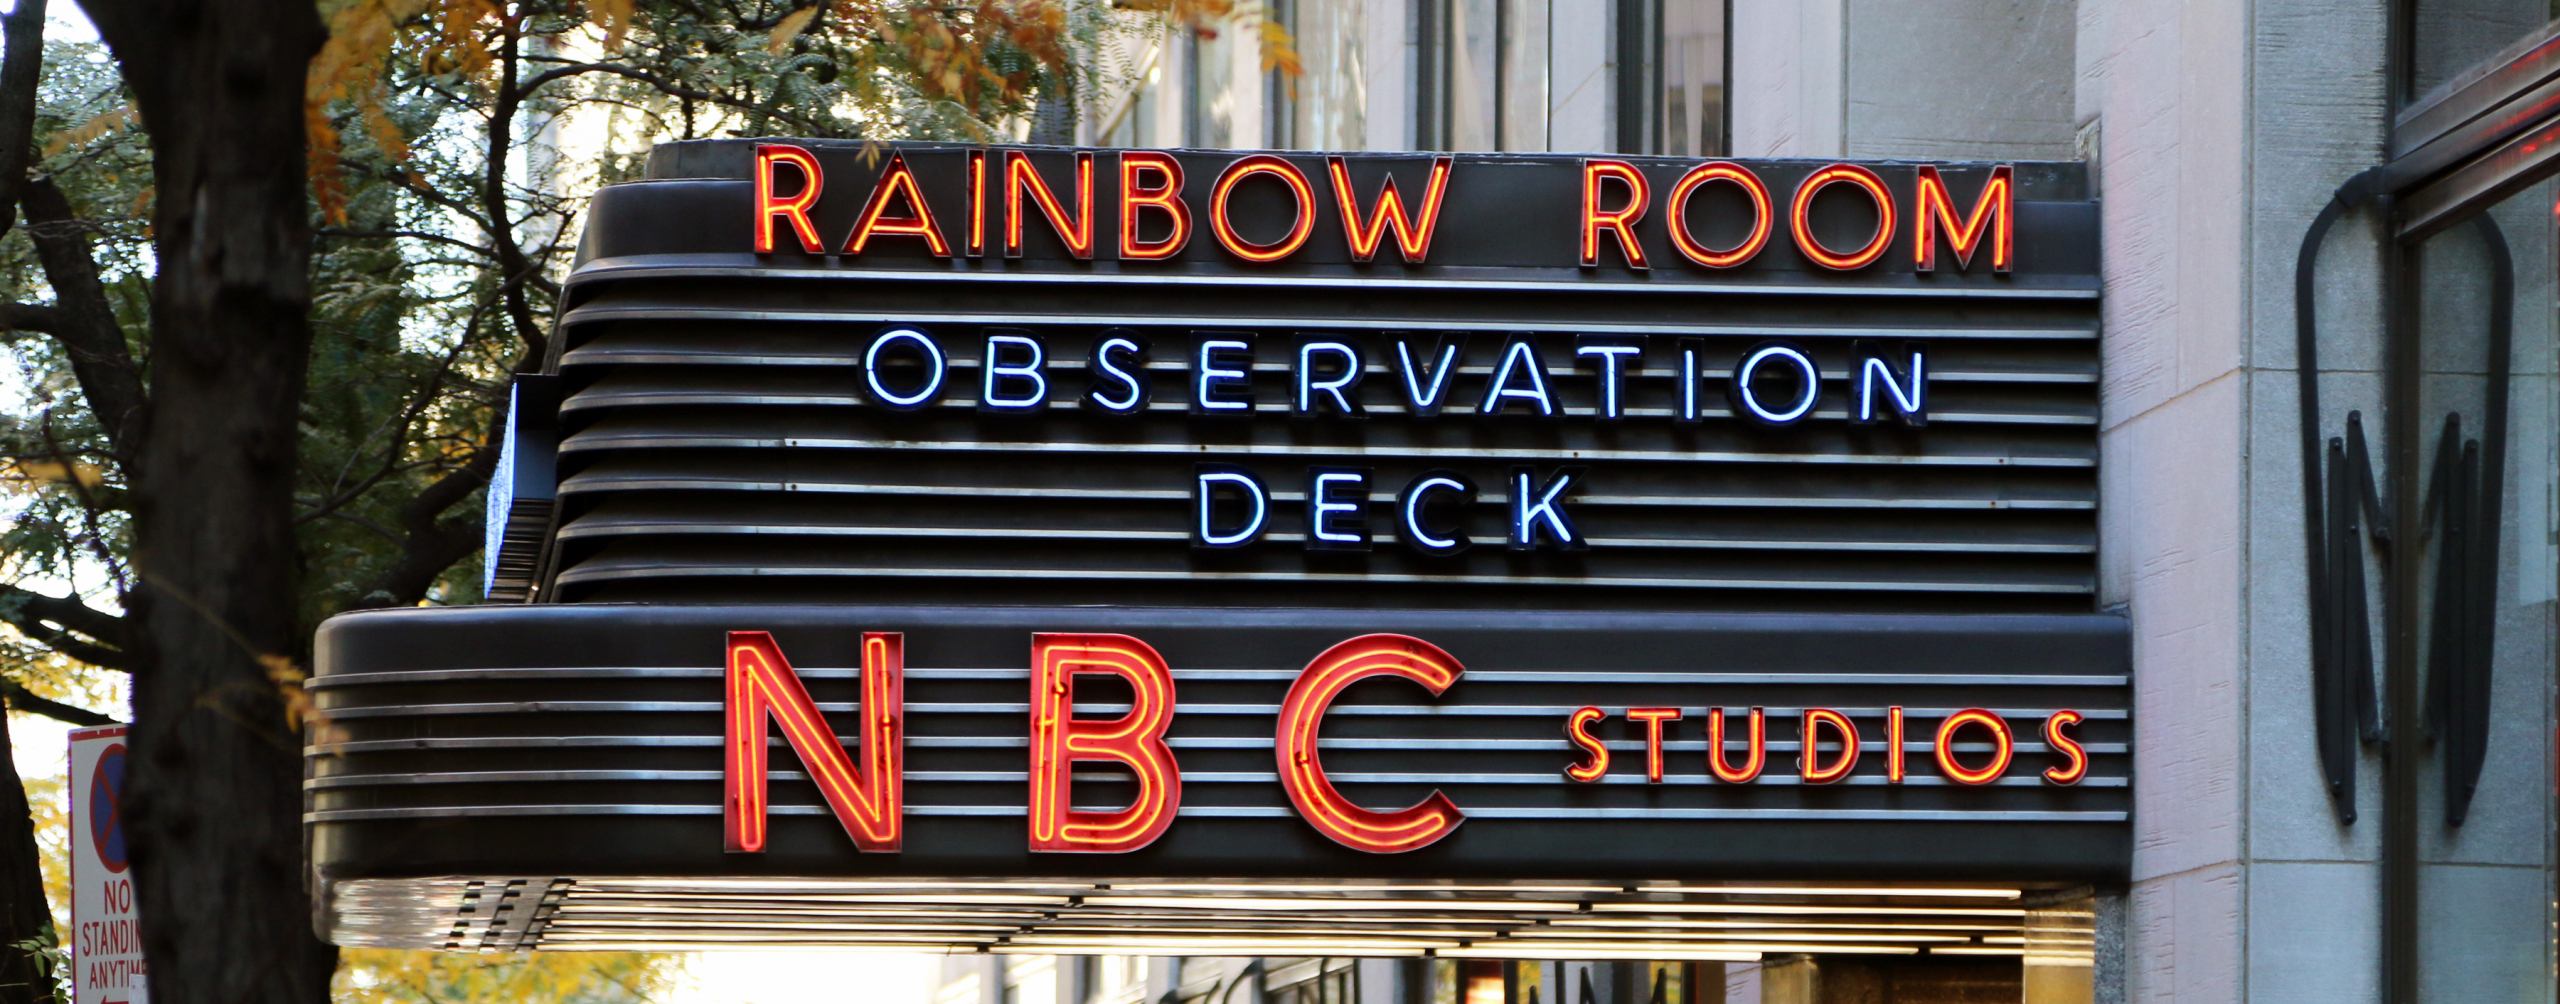 The Tonight Show will come to Metaverse, Thanks to NBC Universal and Samsung